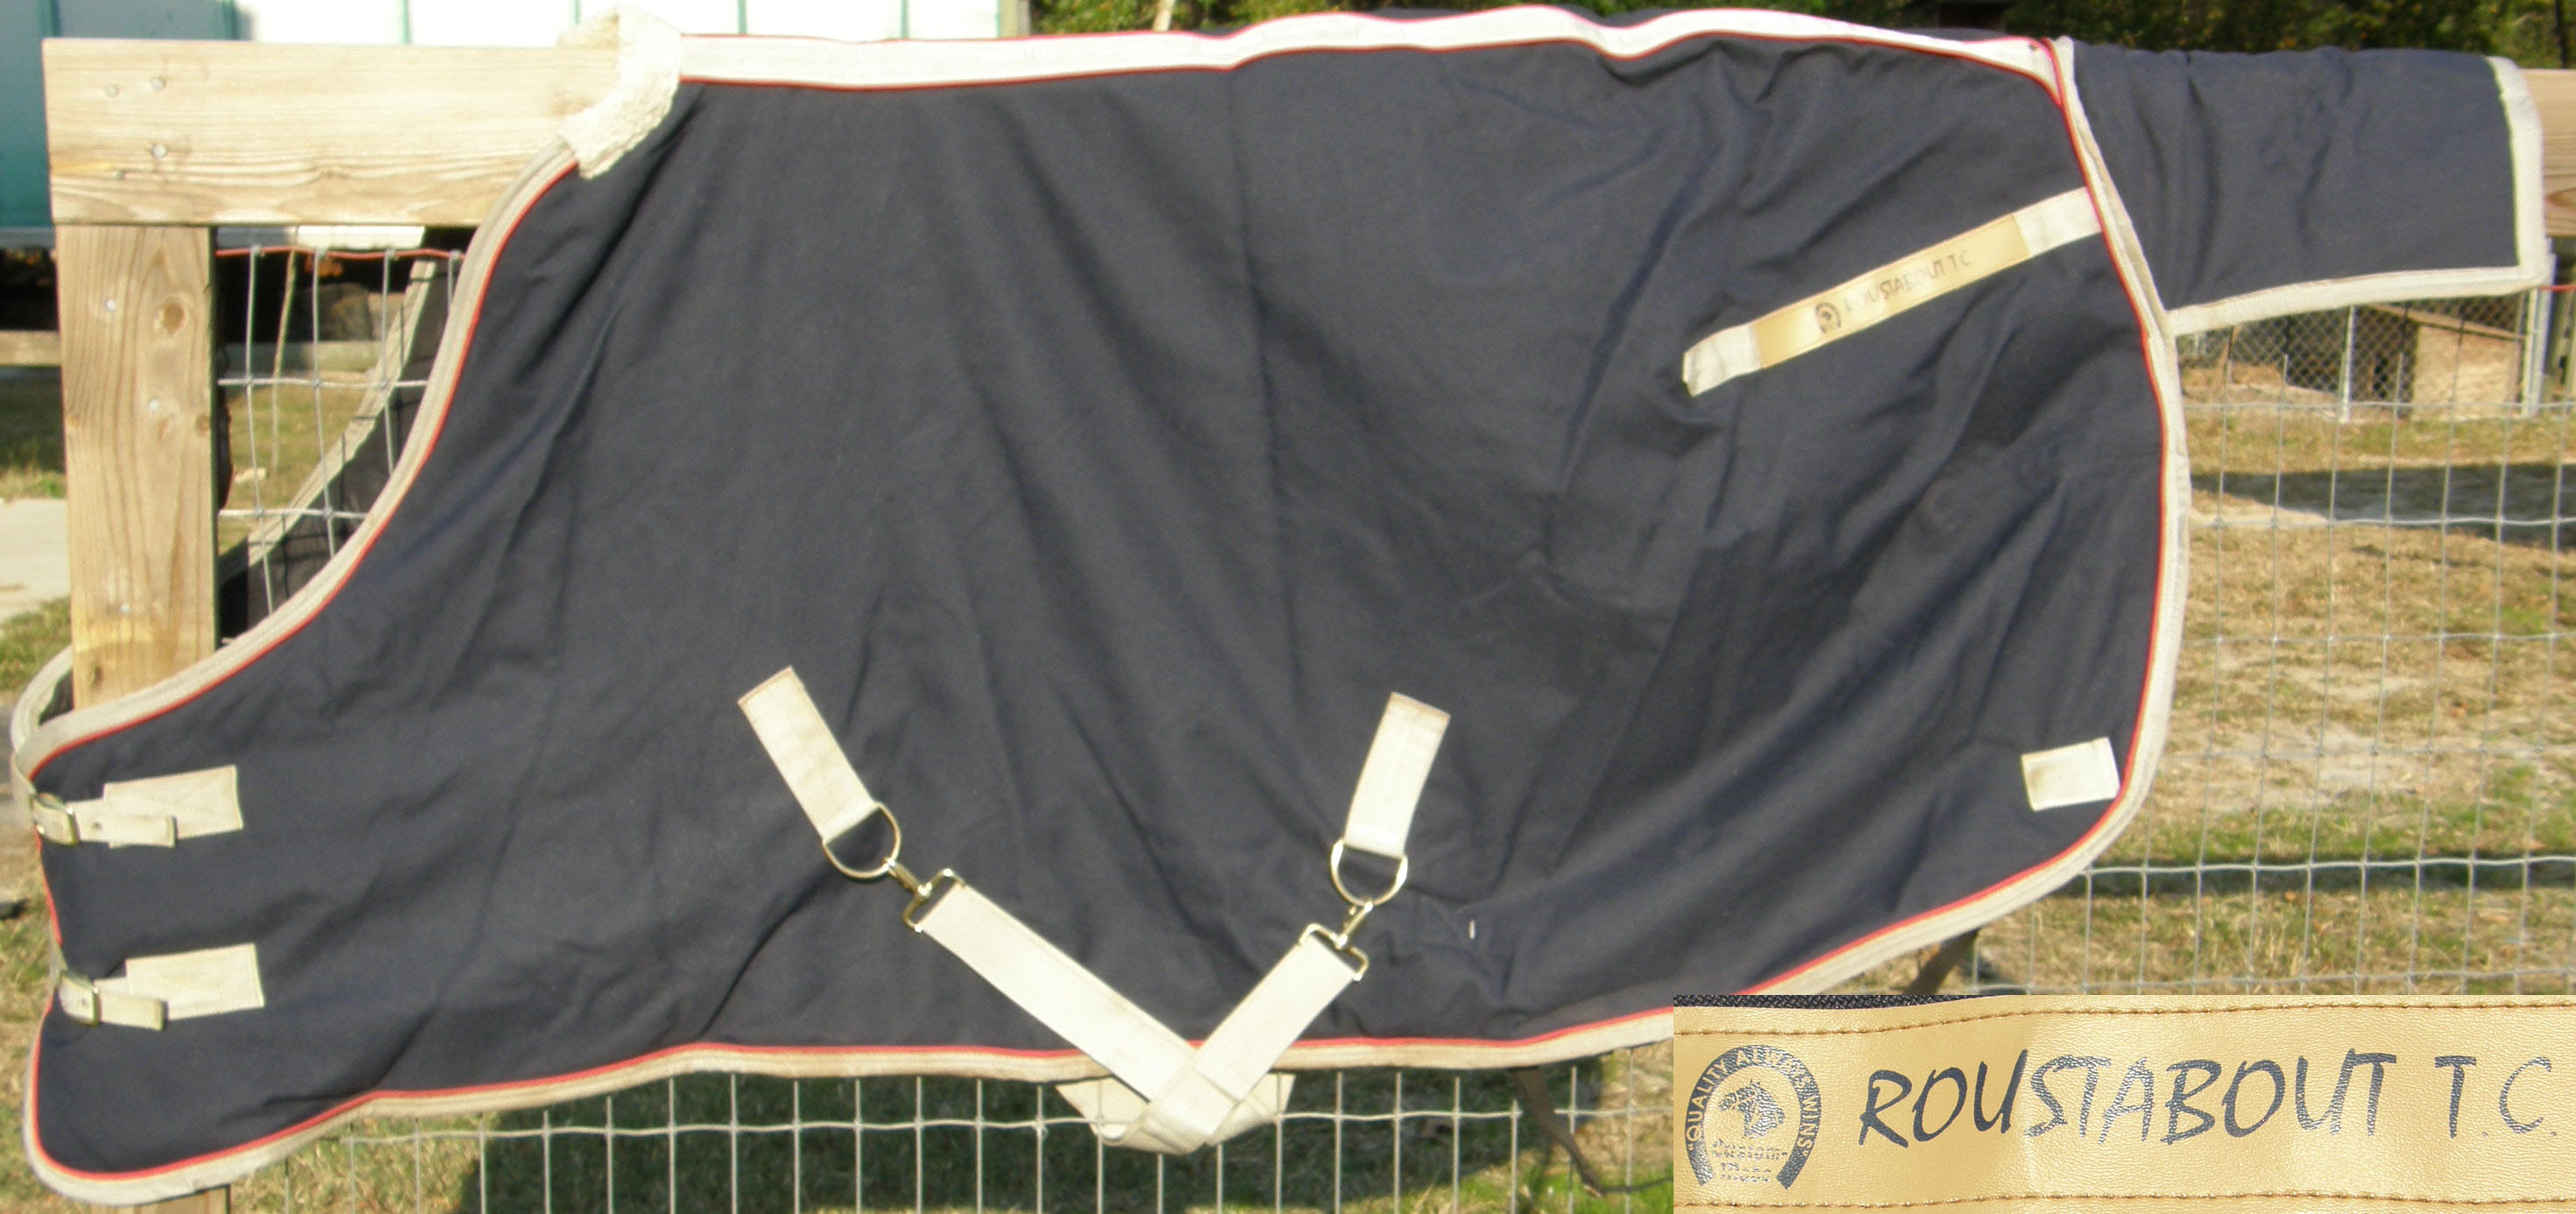 76” OF Custom Made Saddlery Roustabout TC 1200D Waterproof Breathable Turnout Blanket Horse Winter Blanket Navy Blue/Grey